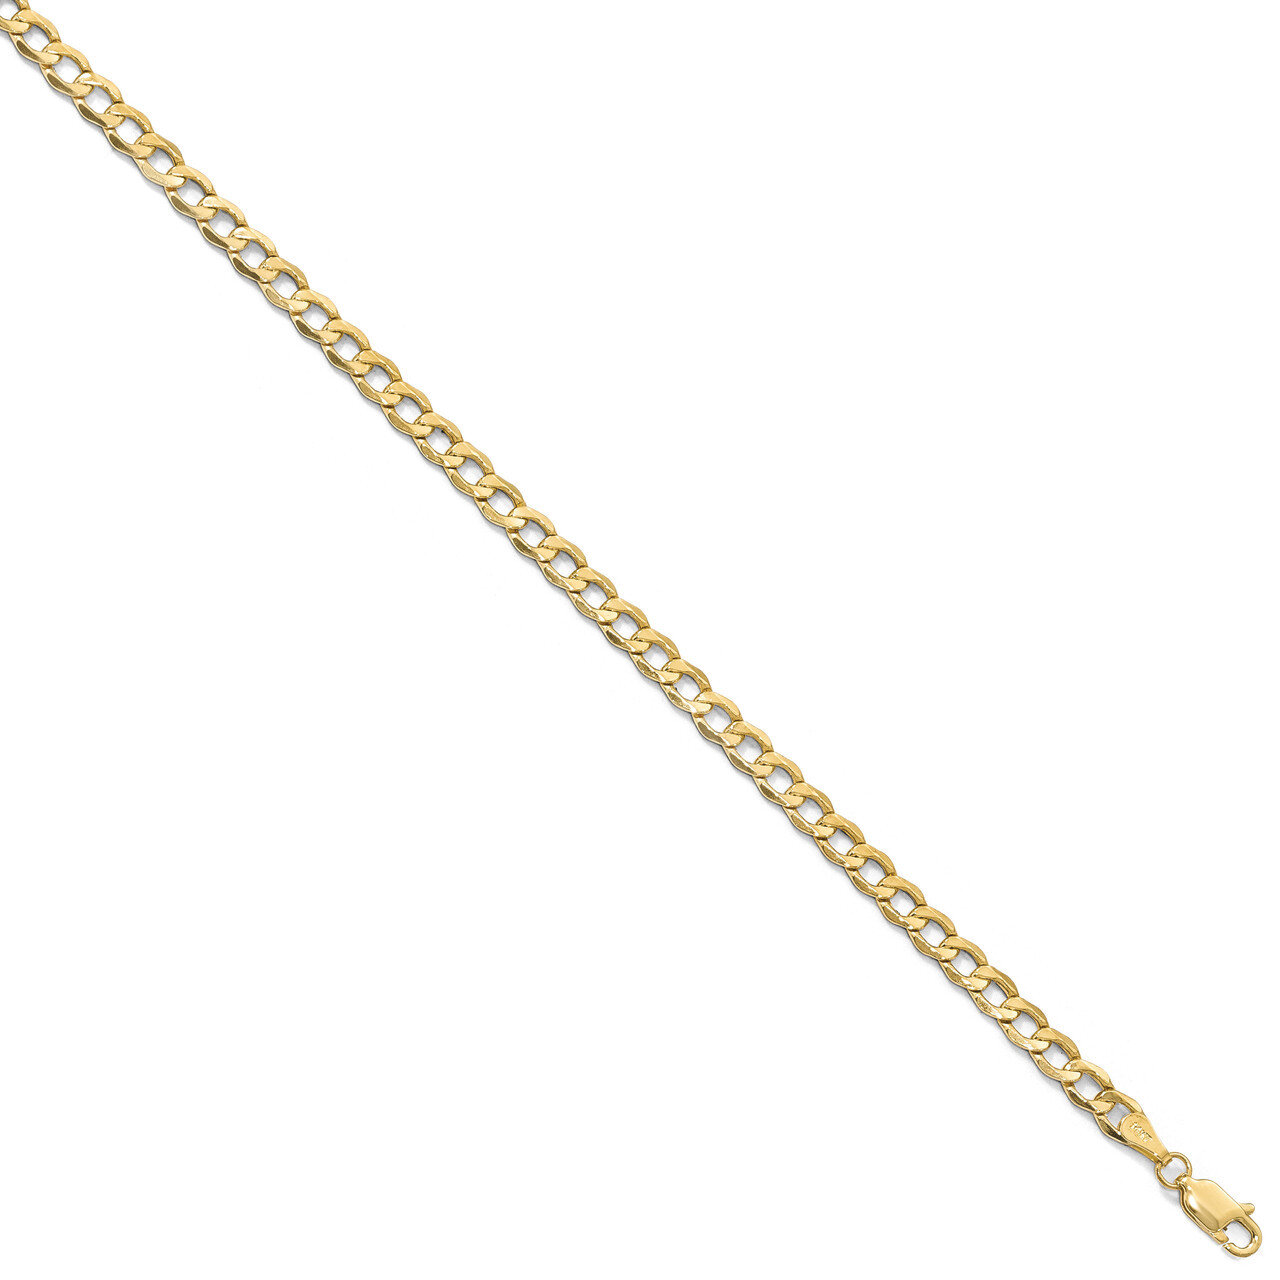 4.3mm Semi-Solid Curb Link Chain 16 Inch 10k Gold HB-8240-16